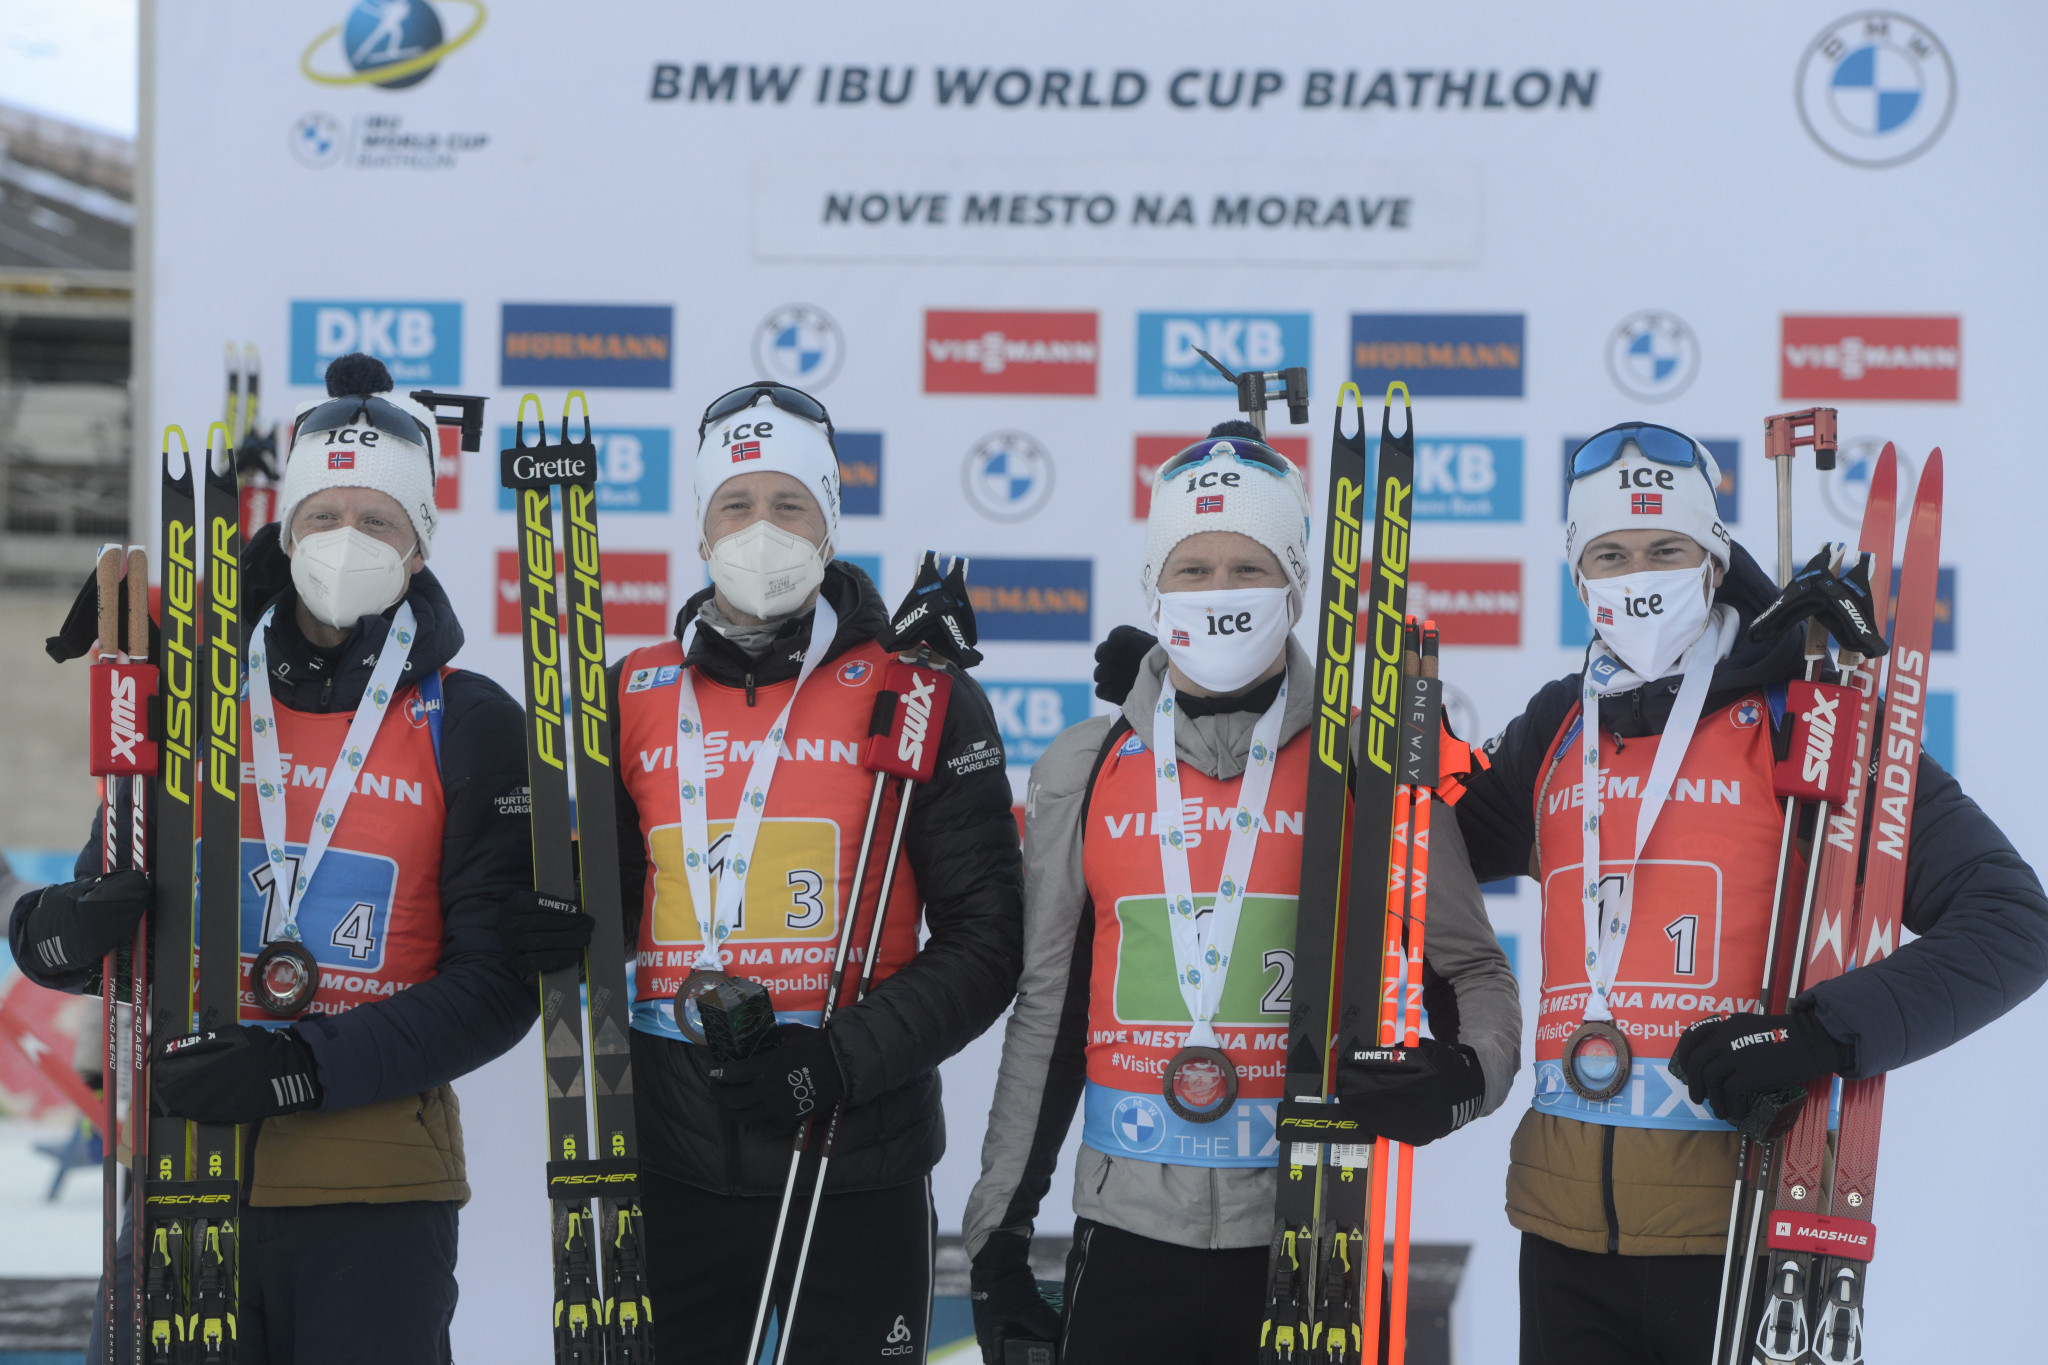 Johannes Thingnes Bø, Tarjei Bø, Johannes Dale and Sturla Holm Laegreid finished third to seal the men's relay crystal globe for Norway ©Getty Images